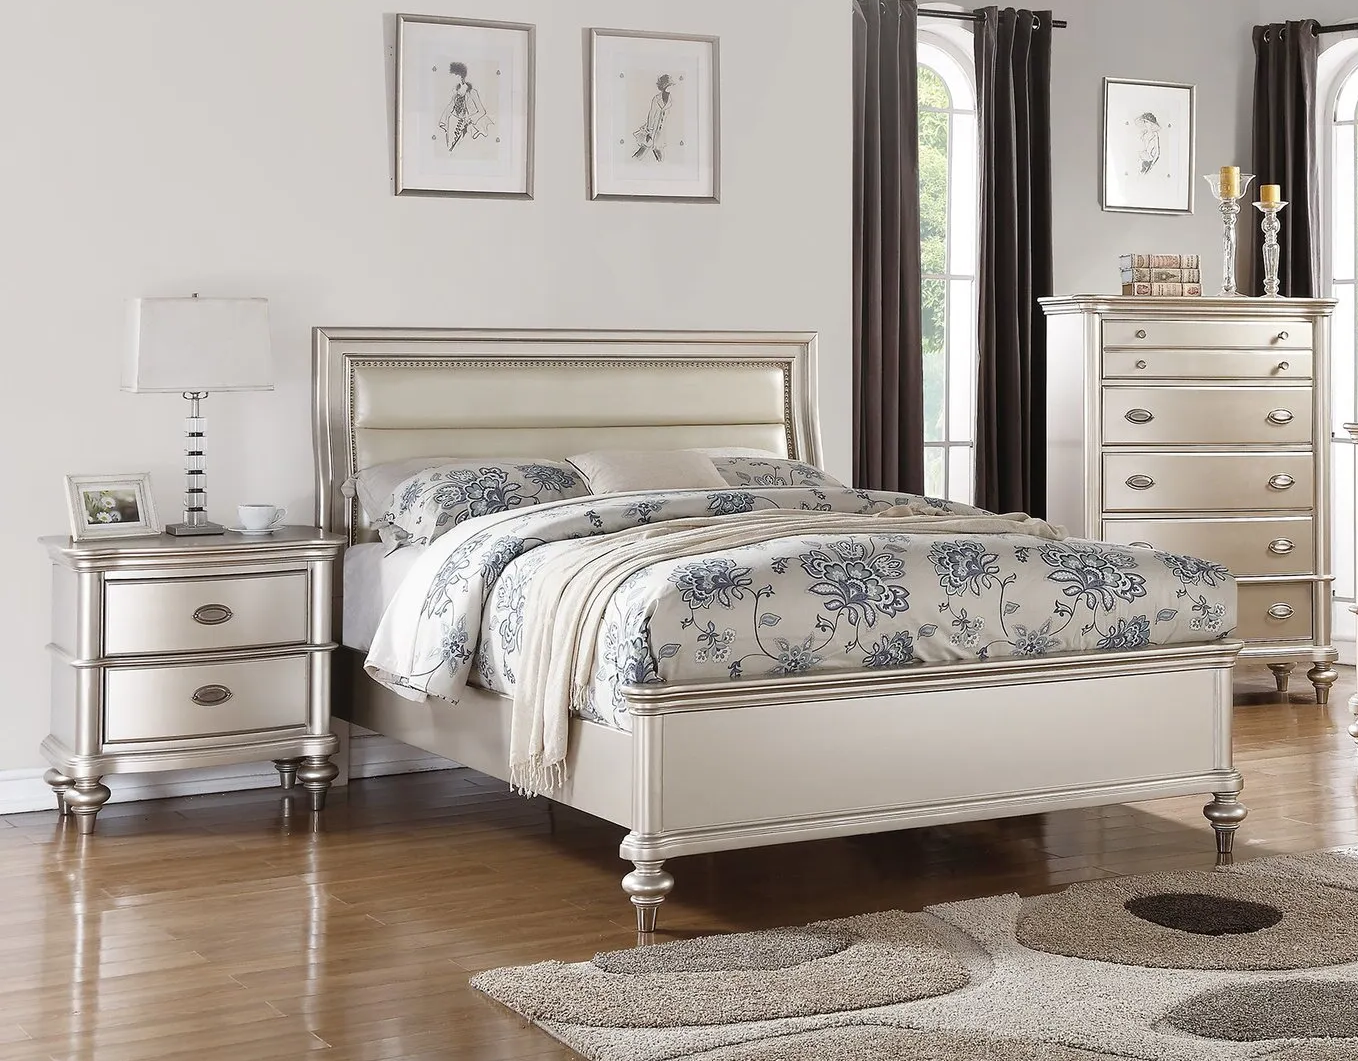 Looking for high quality furniture at affordable prices?